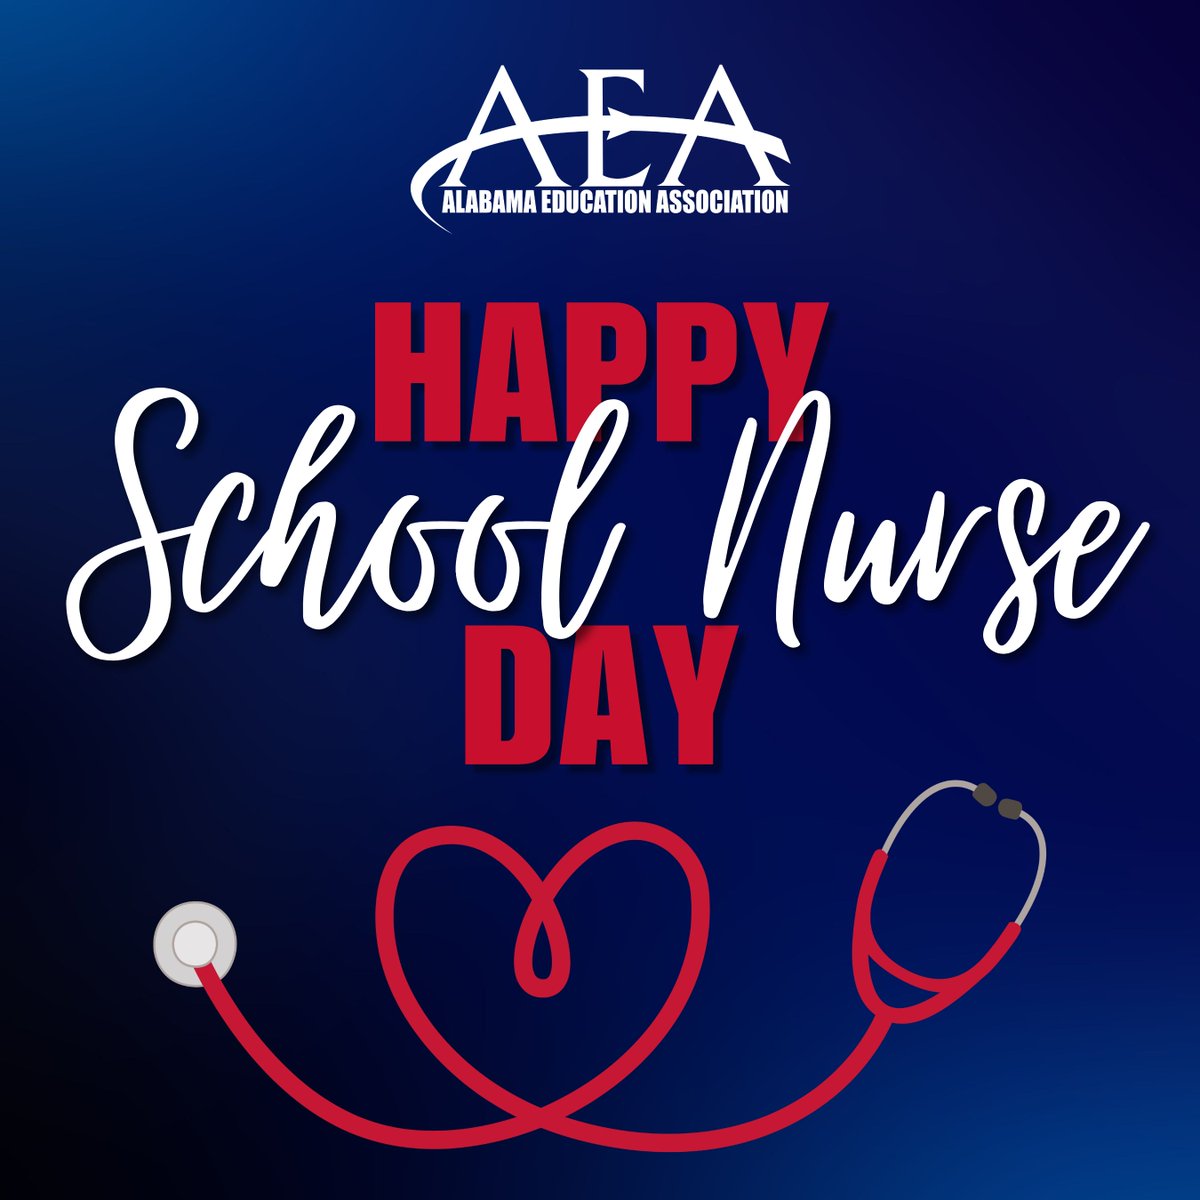 Happy #SchoolNurseDay! We appreciate all school nurses for their dedication to keeping Alabama's students healthy and safe. Share this post and tag a school nurse in the comments to thank them for all that they do! #TeacherAppreciationWeek #myAEA